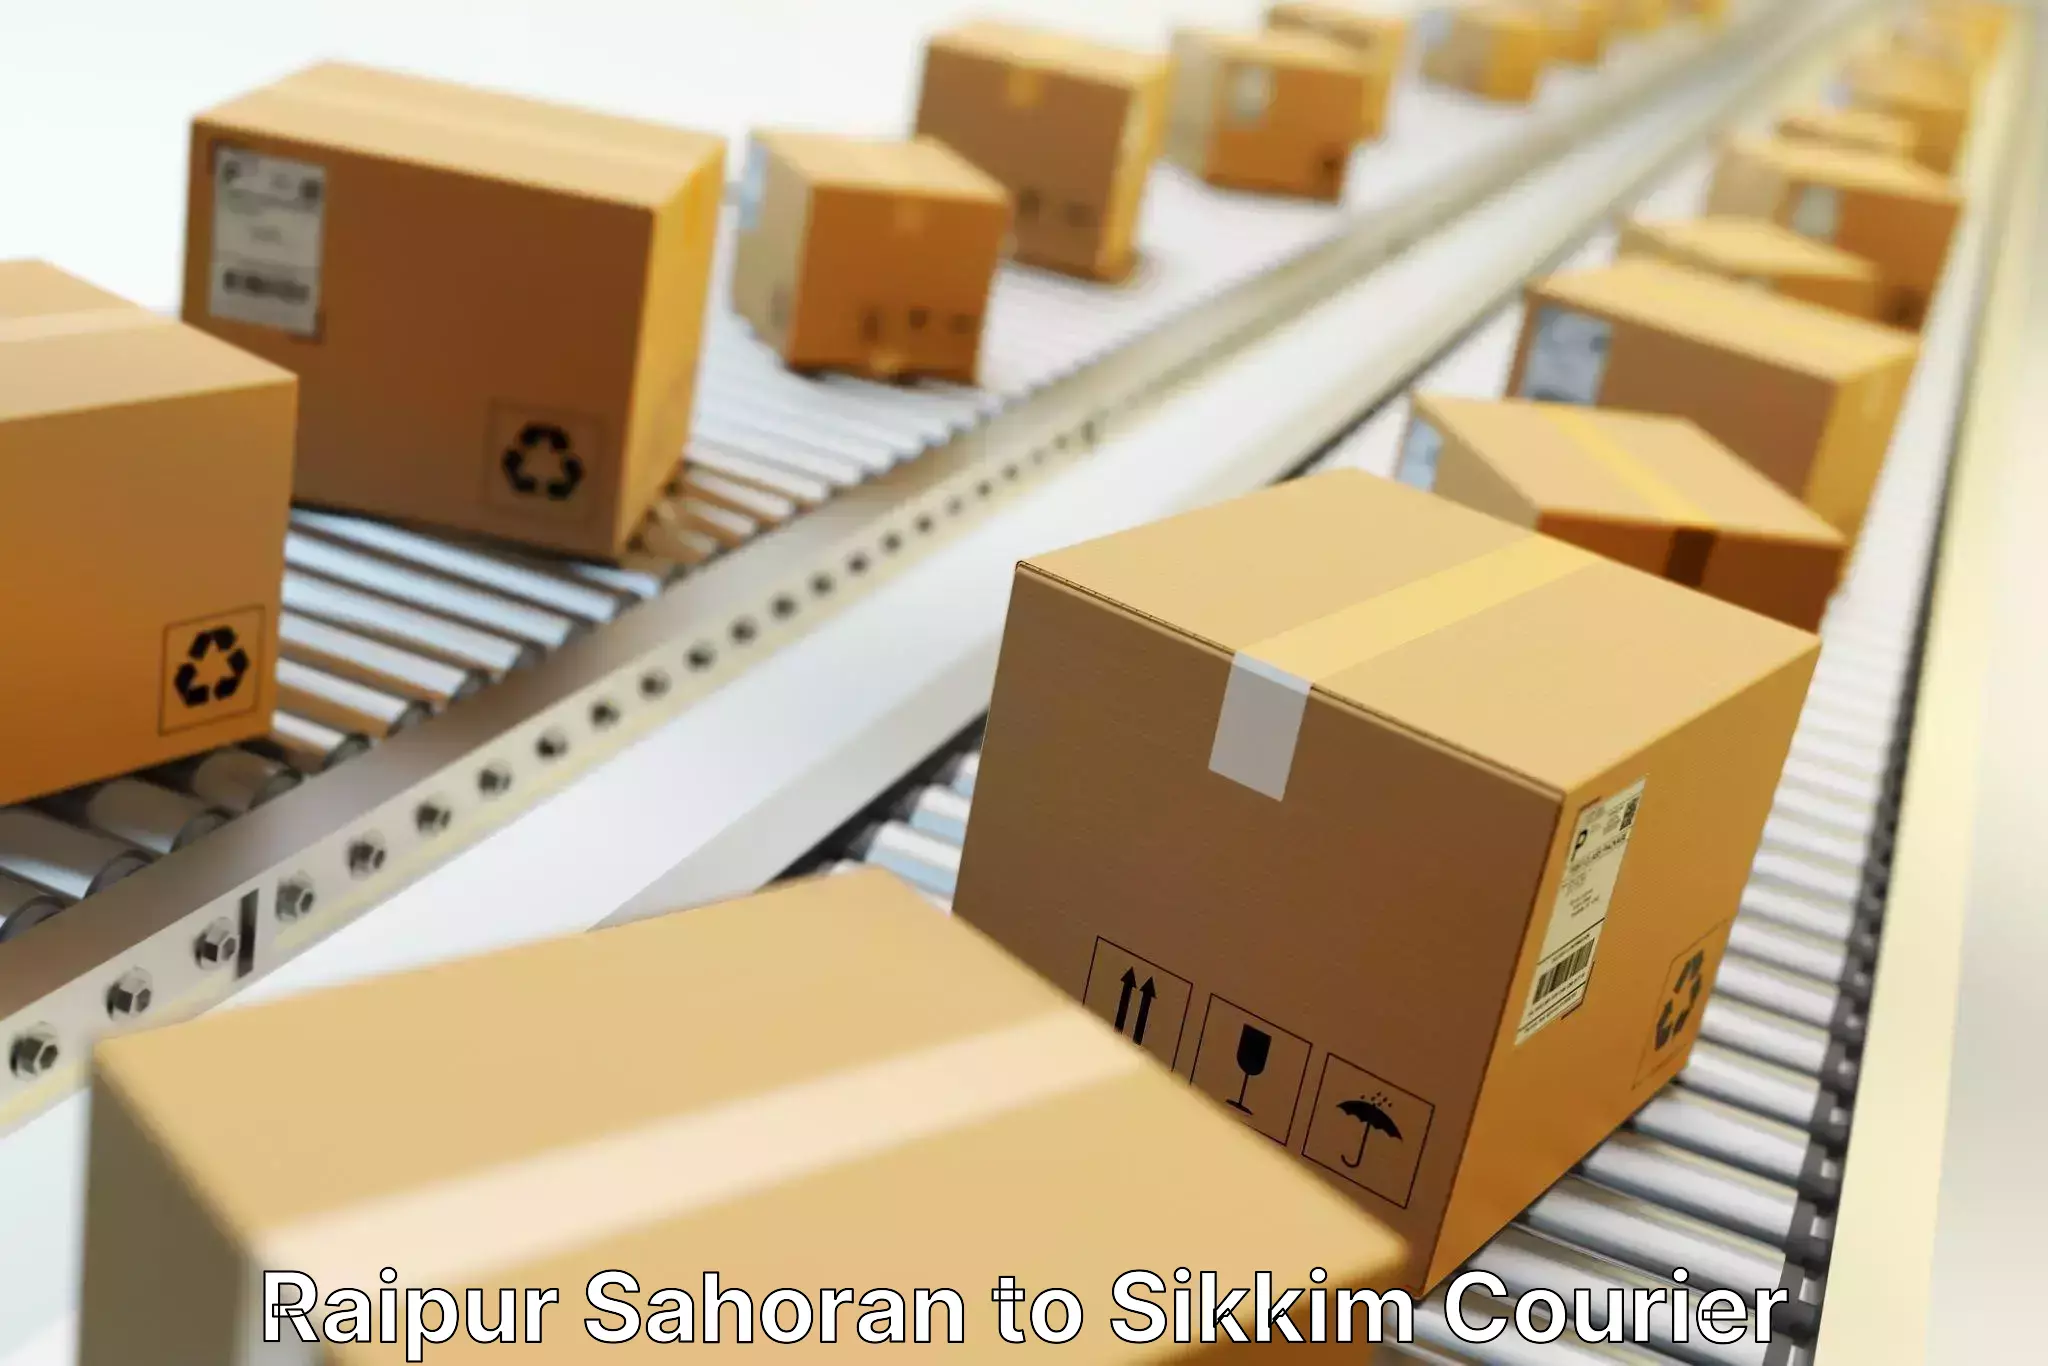 Fast-track shipping solutions Raipur Sahoran to North Sikkim